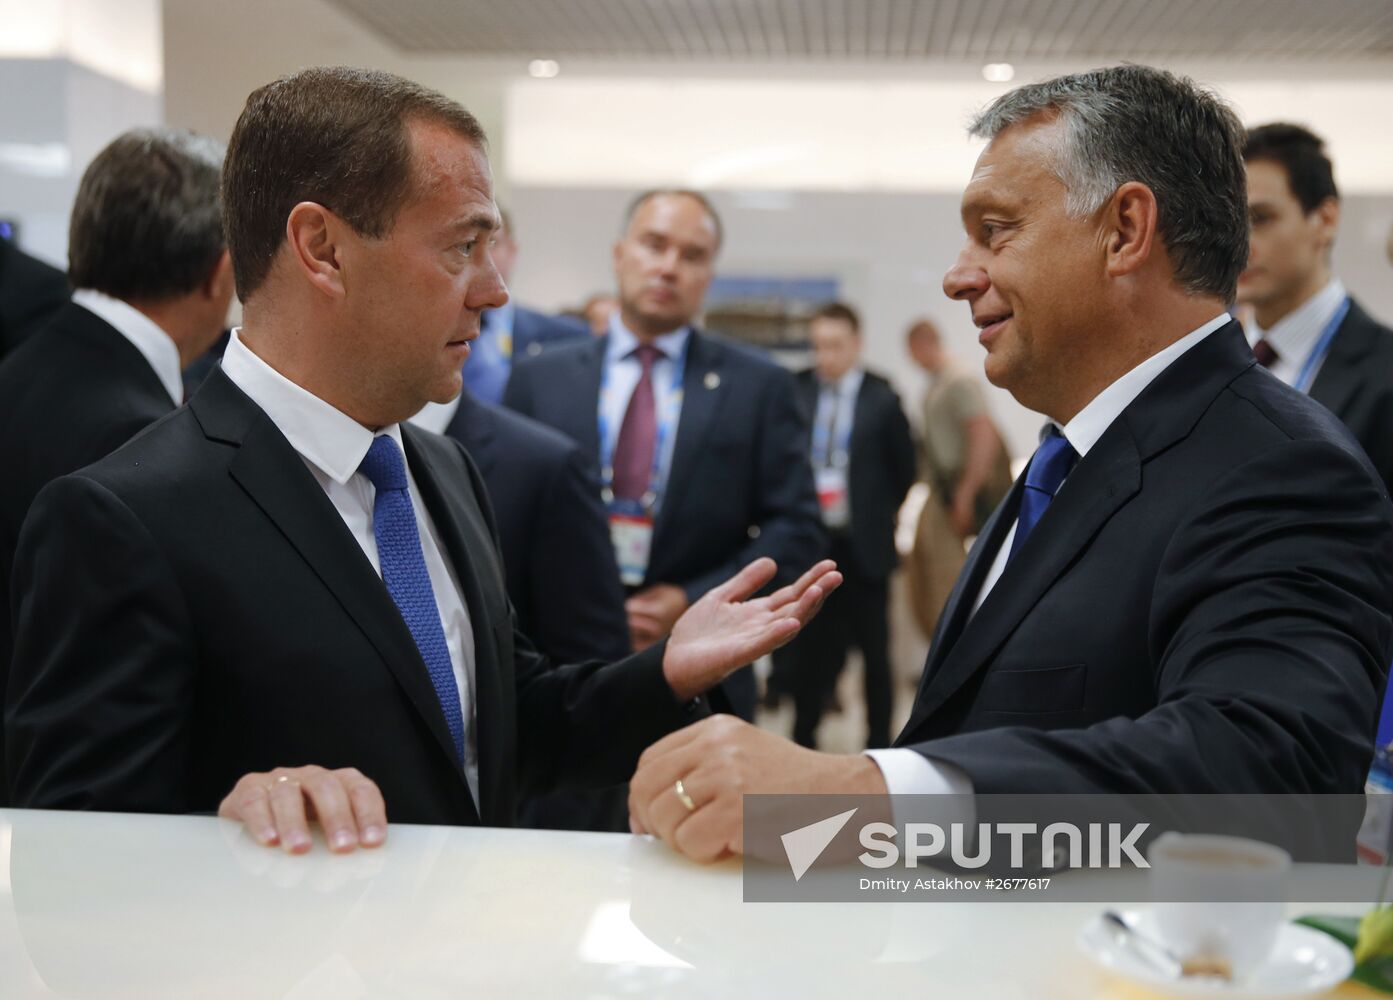 Dmitry Medvedev attends 16th FINA World Championships swimming competition